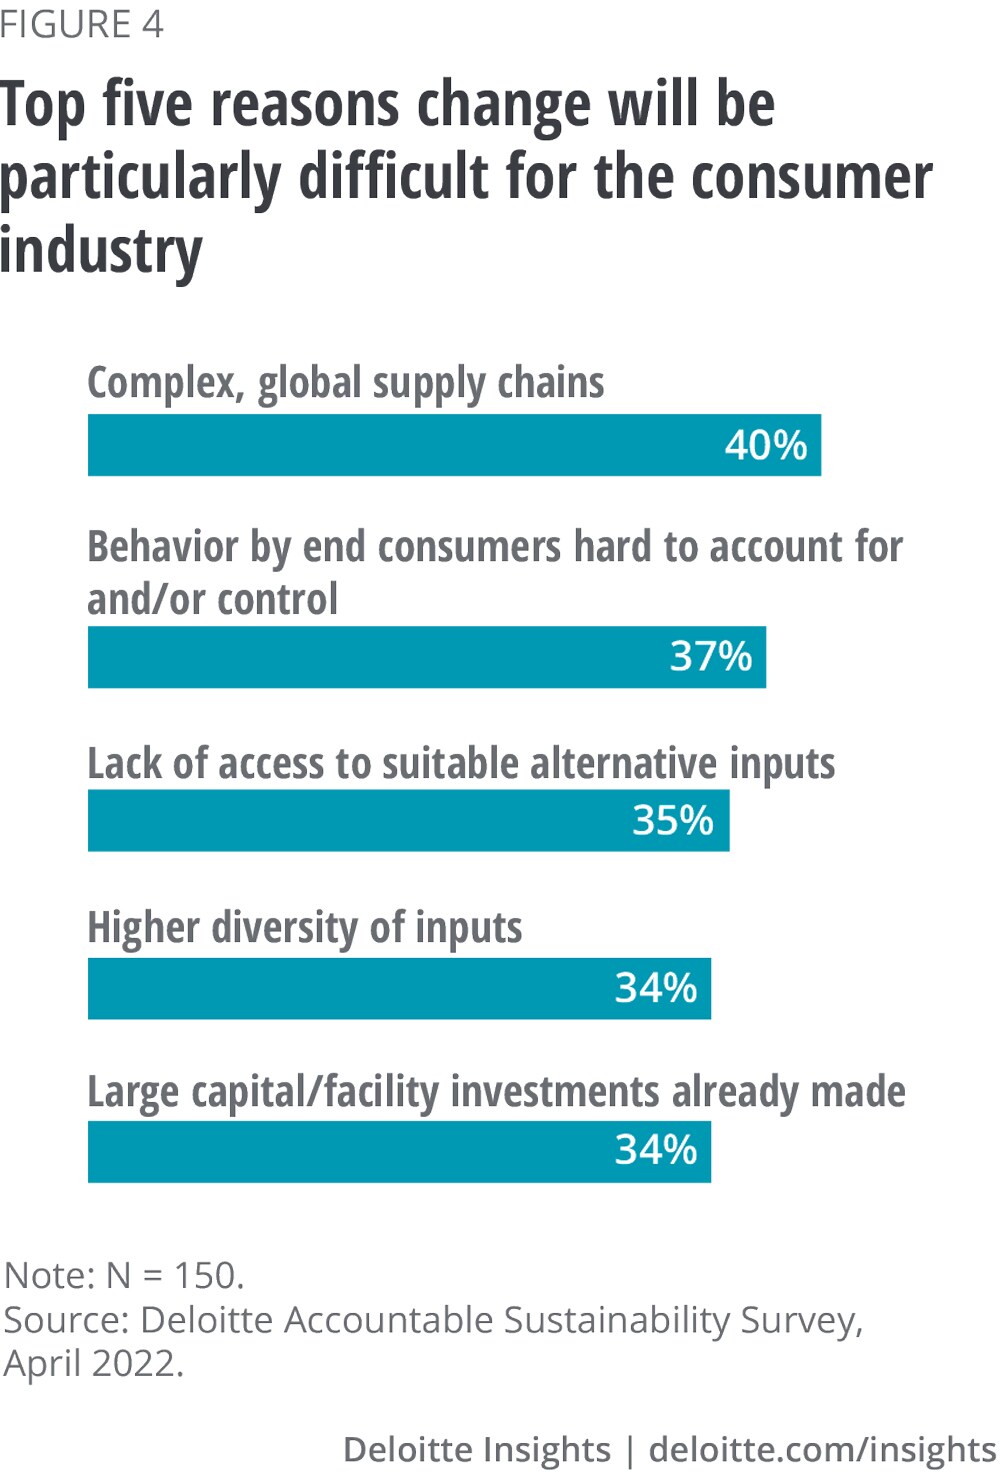 Figure 4. Top five reasons change will be particularly difficult for the consumer industry